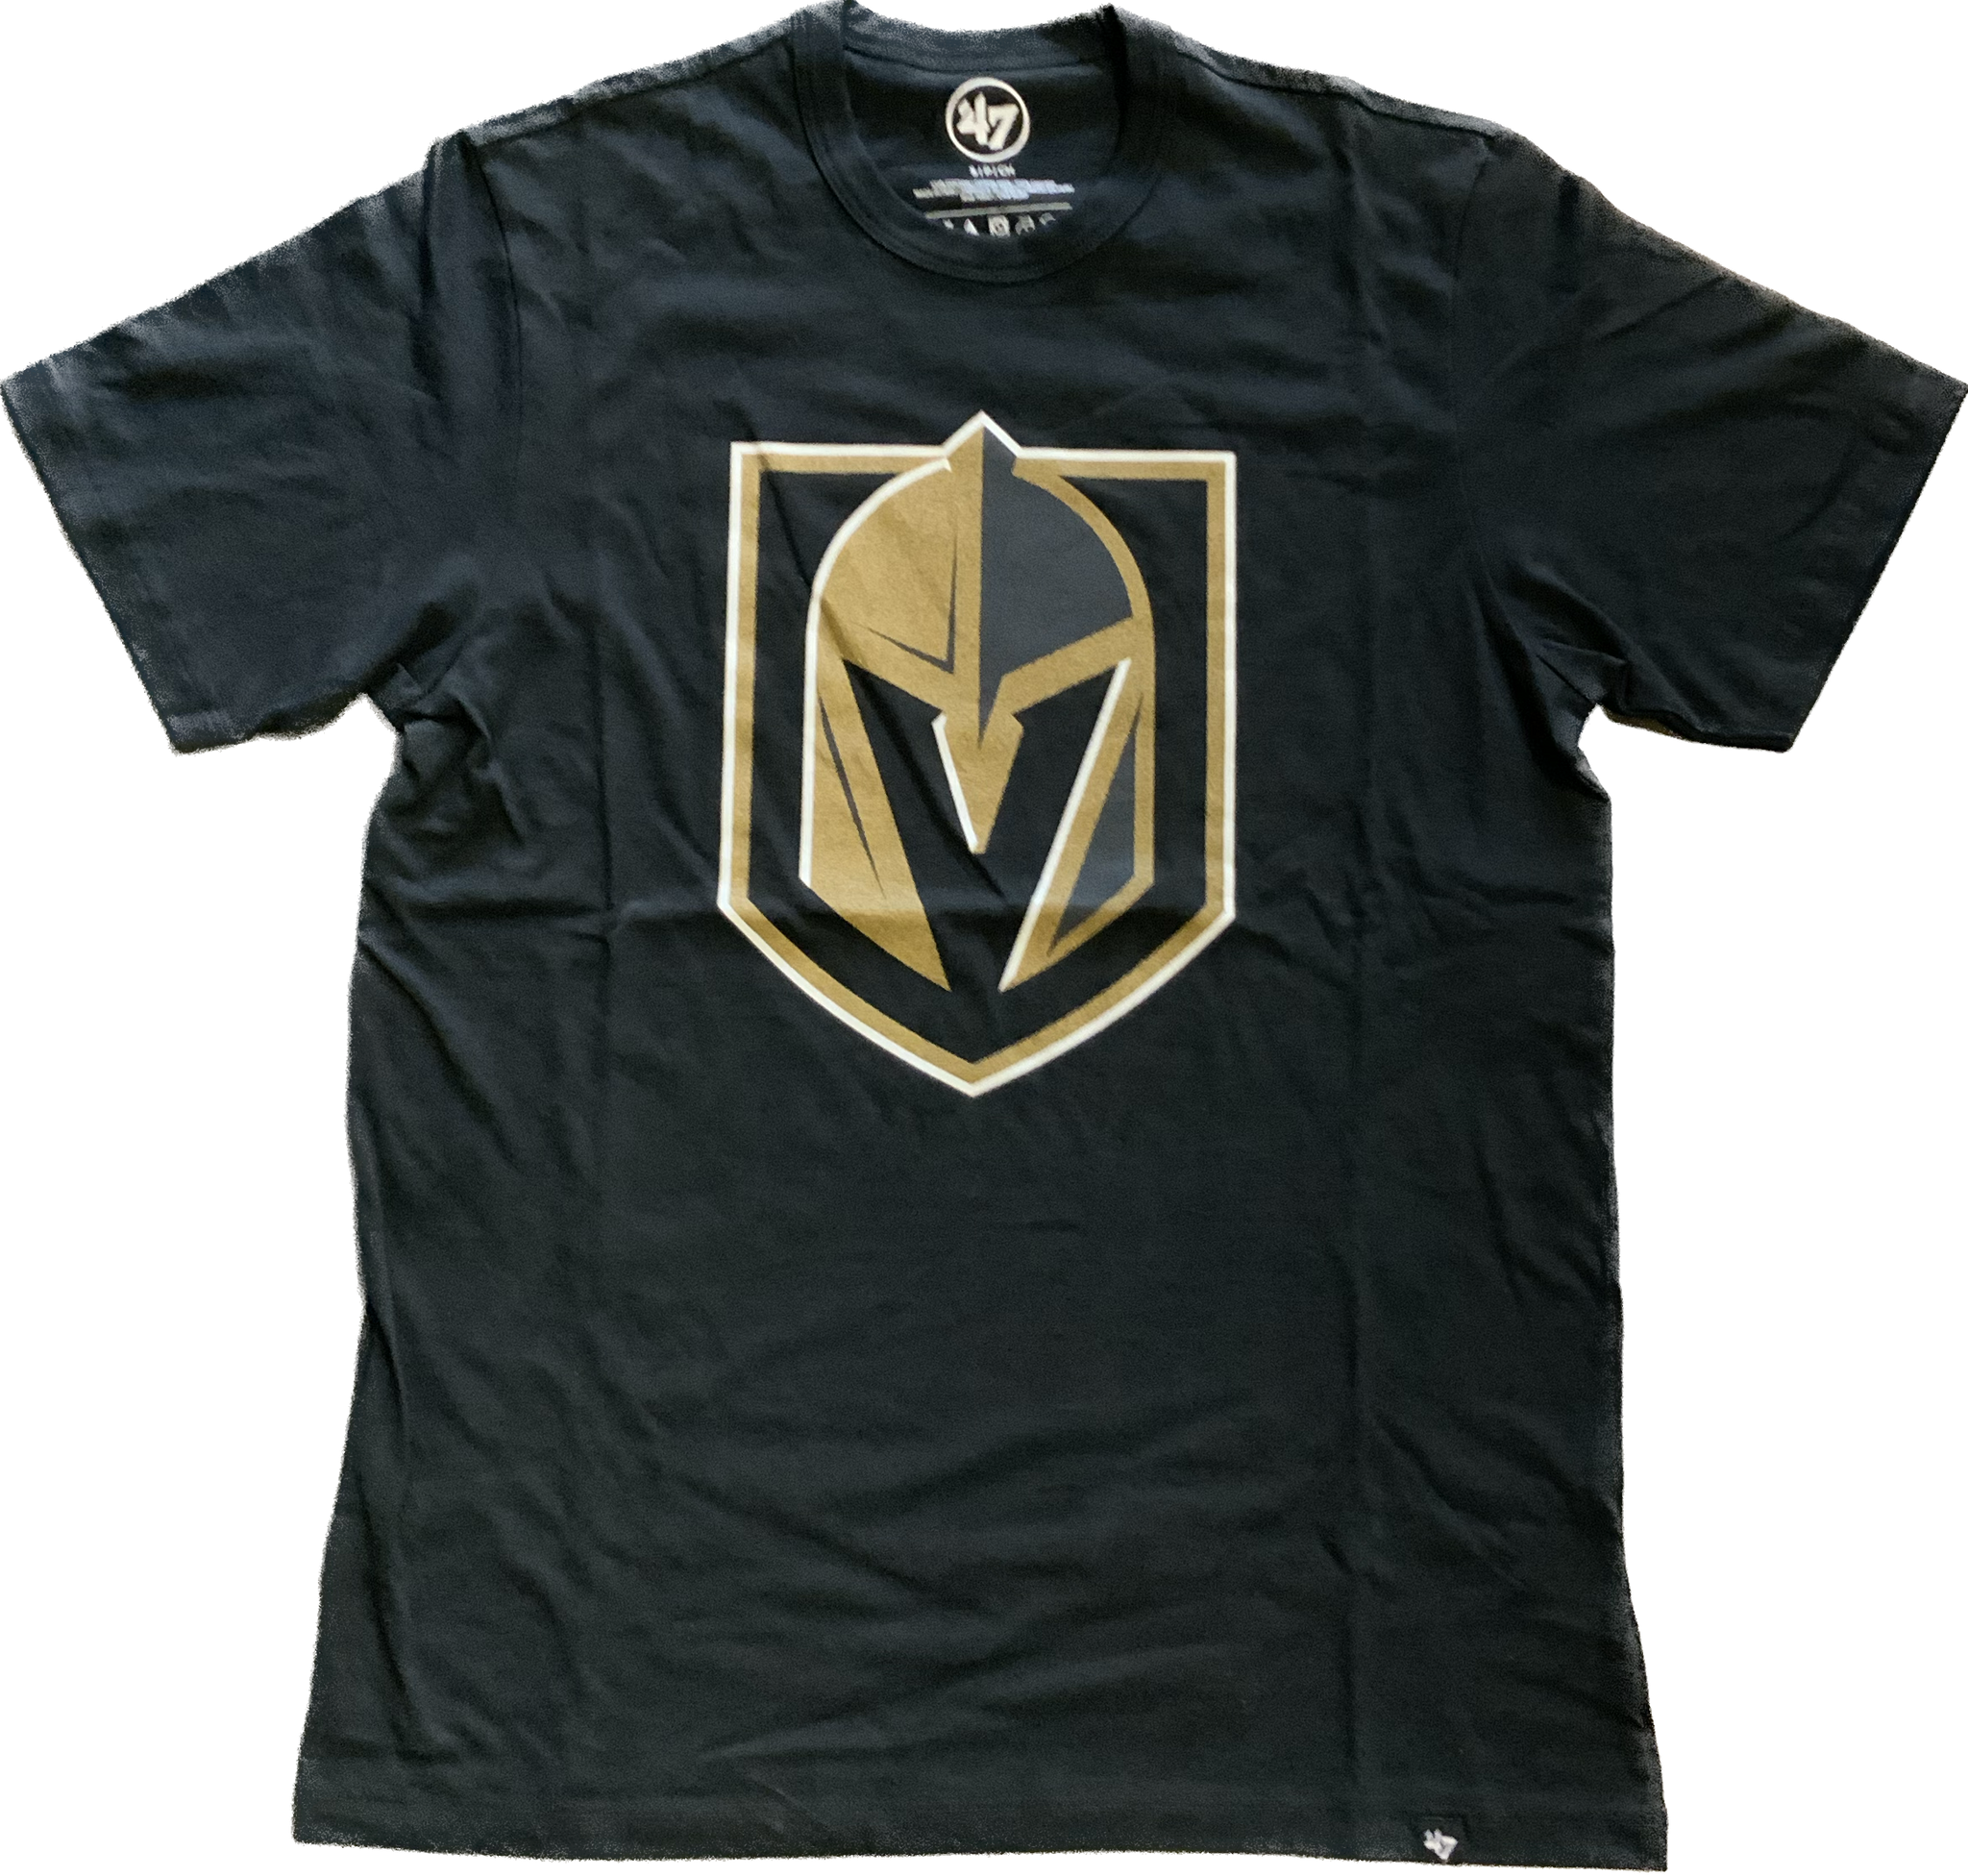 Vegas Golden Knights bring the town's first pro swag at the Armory